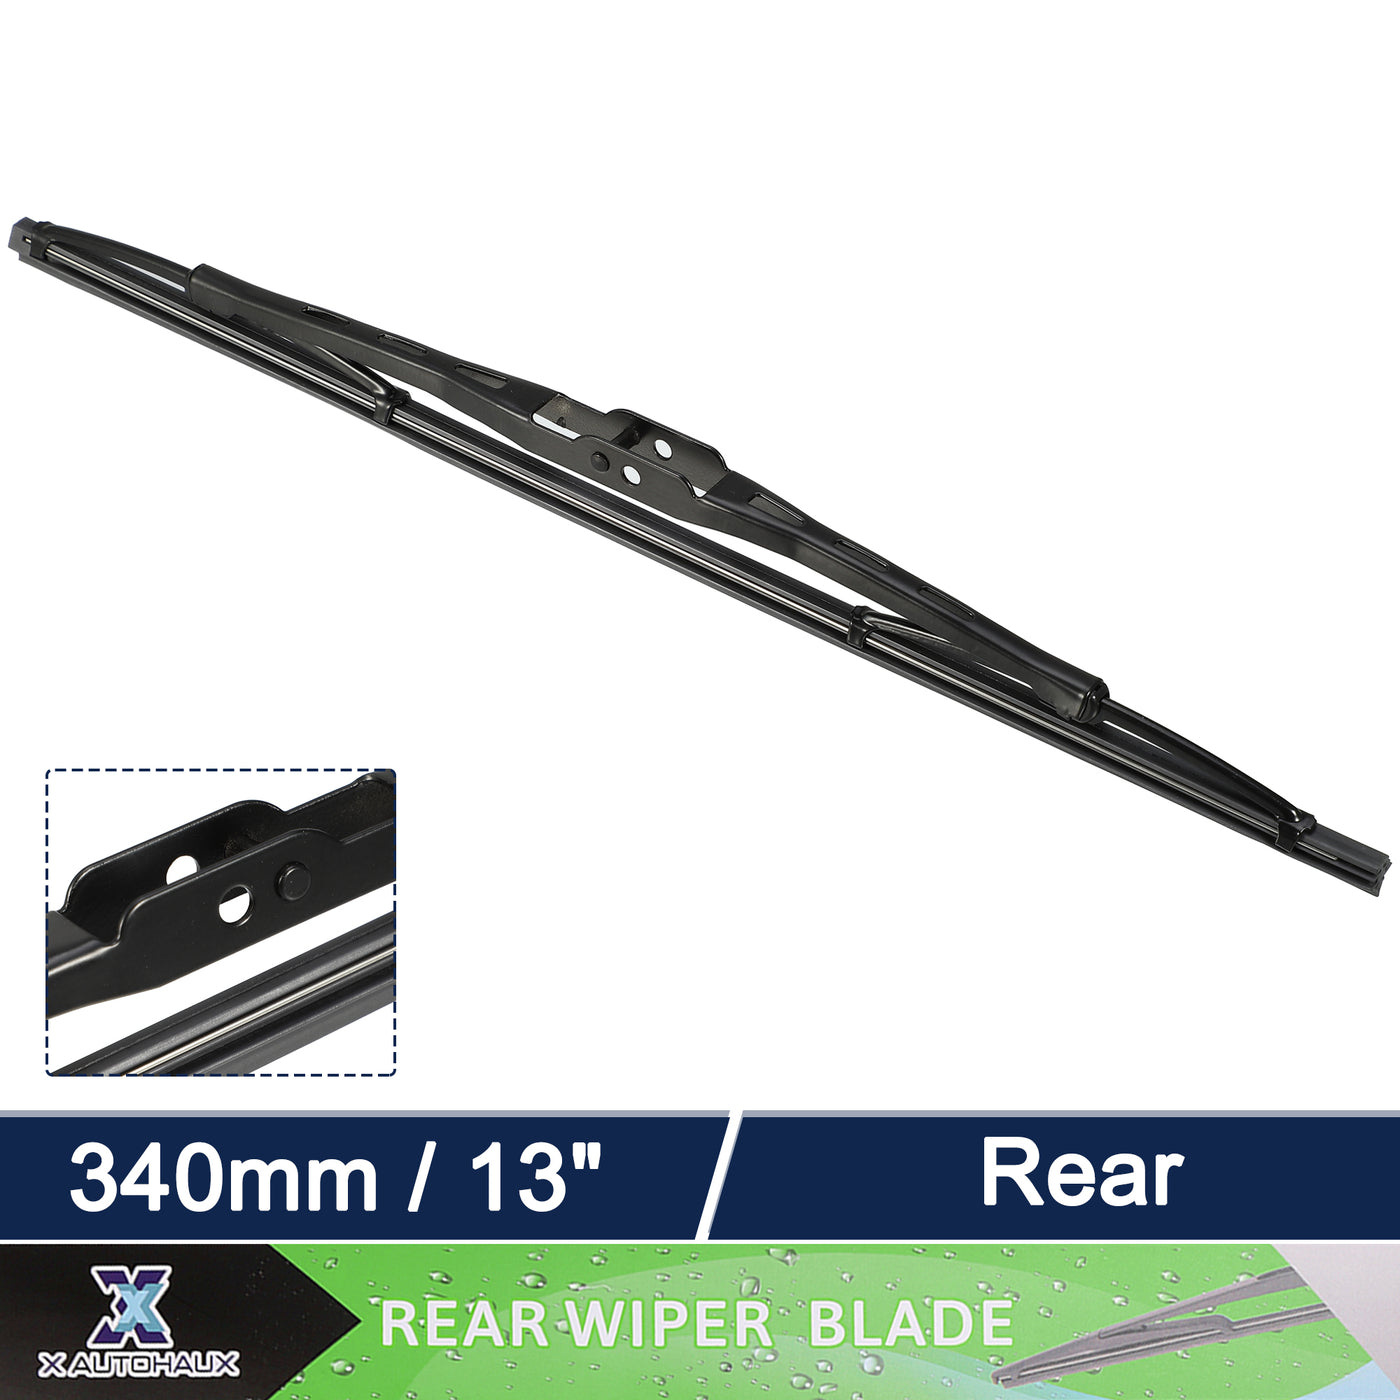 X AUTOHAUX Rear Windshield Wiper Blade Replacement for Audi A3 2003-2013 for Audi S3 2006-2013 for Audi A4 Avant 2001-2008